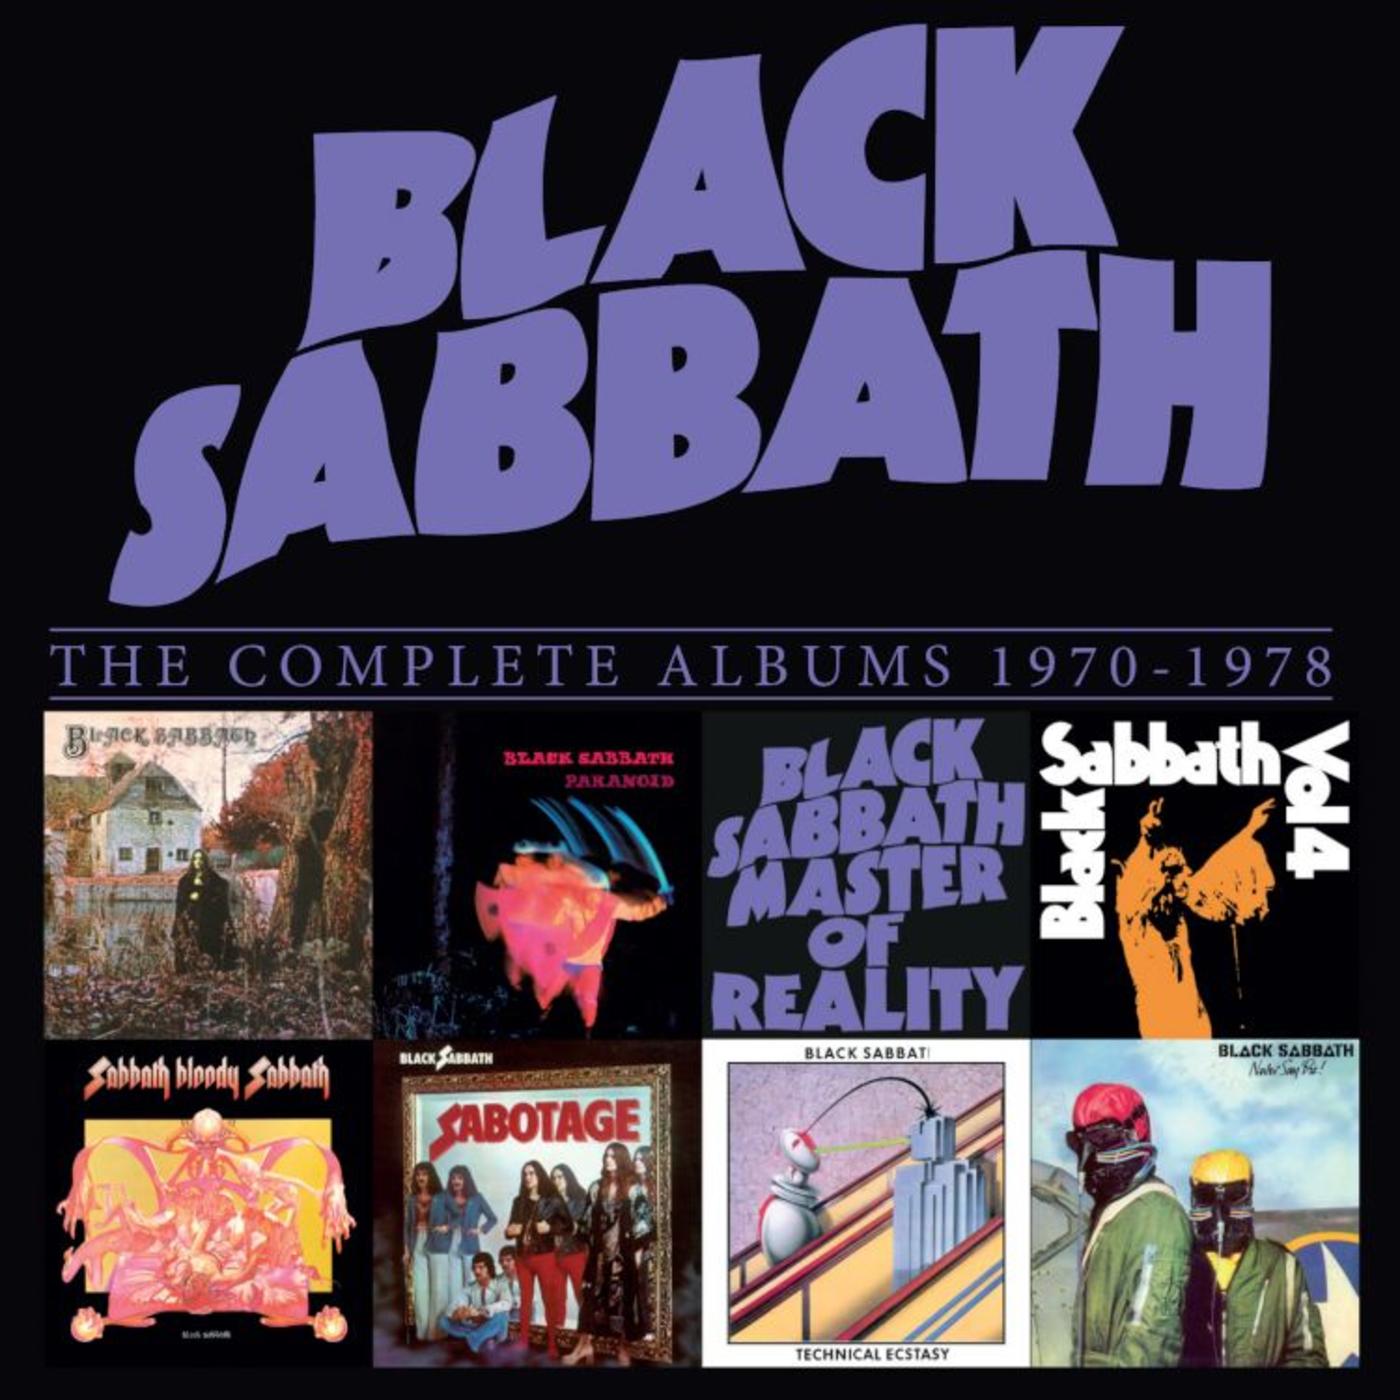 The Complete Albums 1970-1978